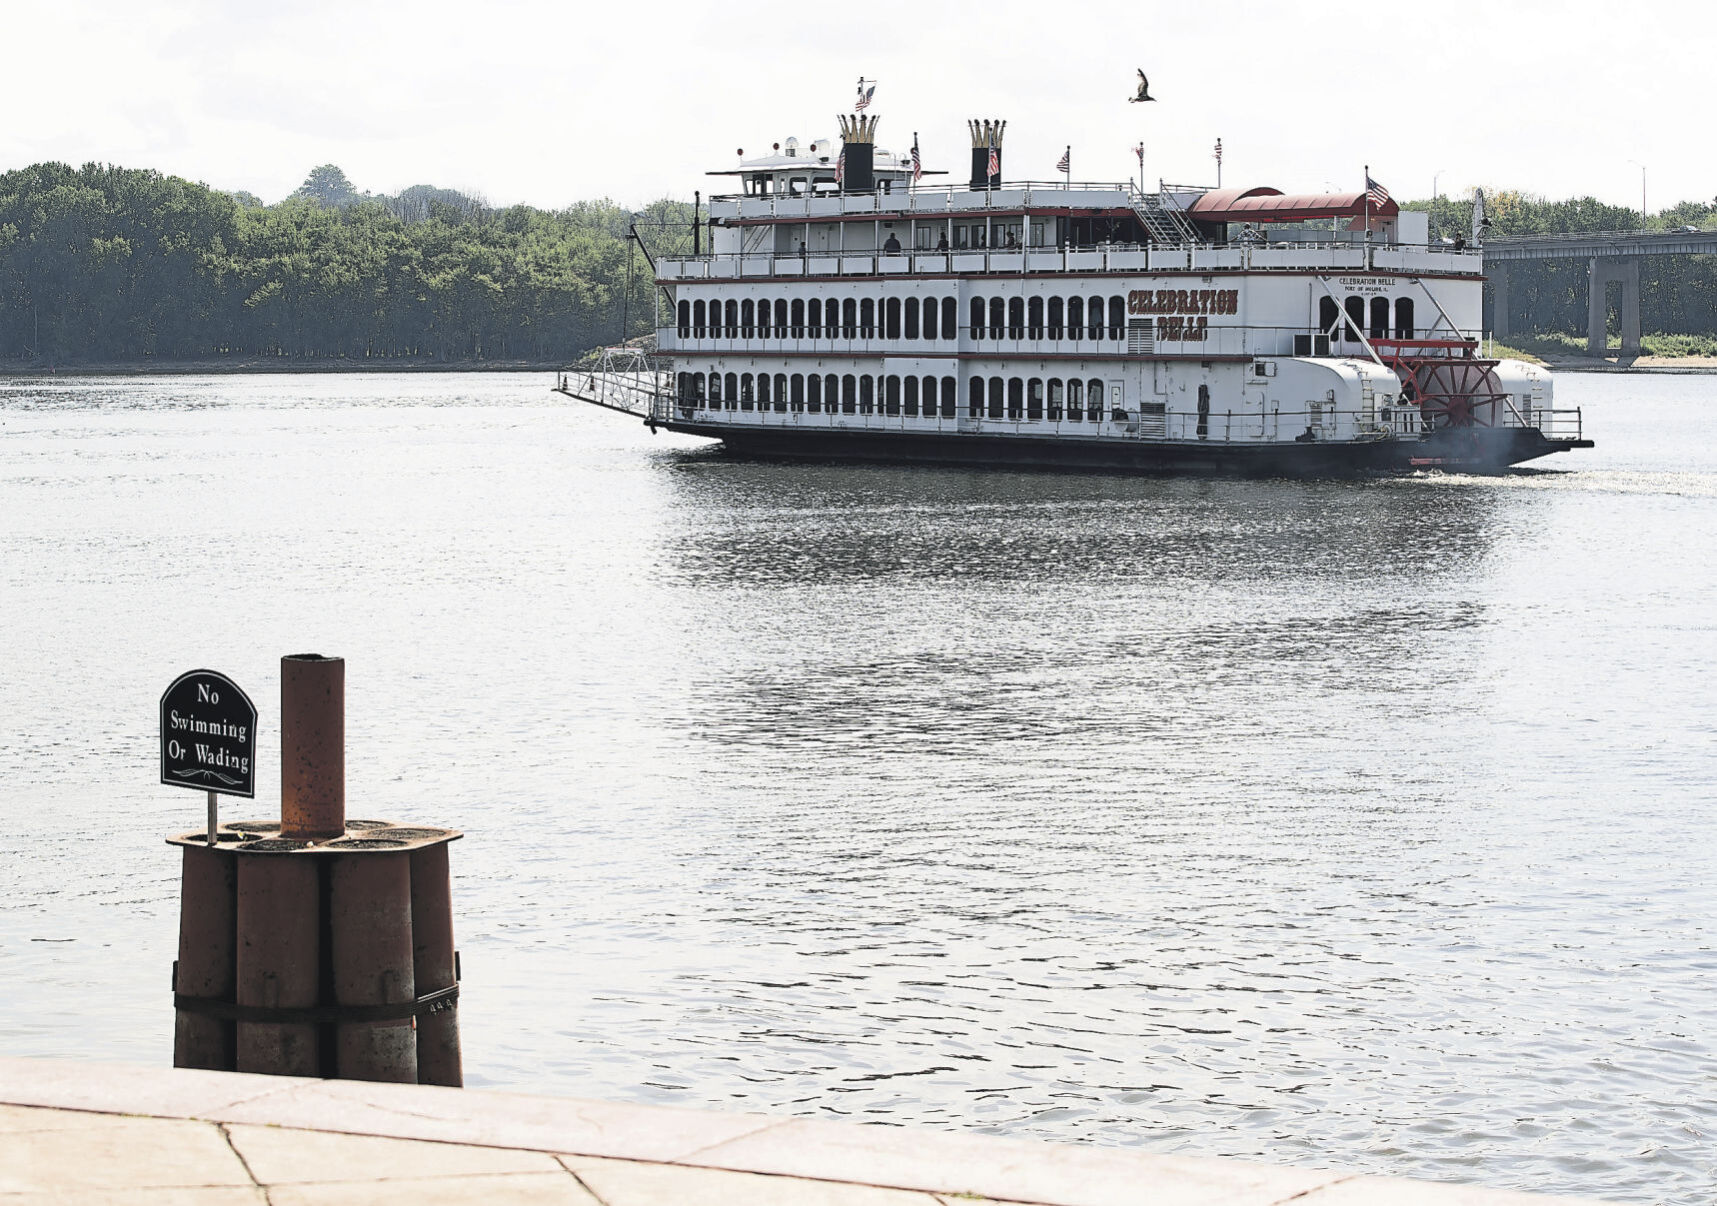 The Celebration Belle, a 750-passenger vessel, stops in Dubuque several times each month.    PHOTO CREDIT: Stephen Gassman